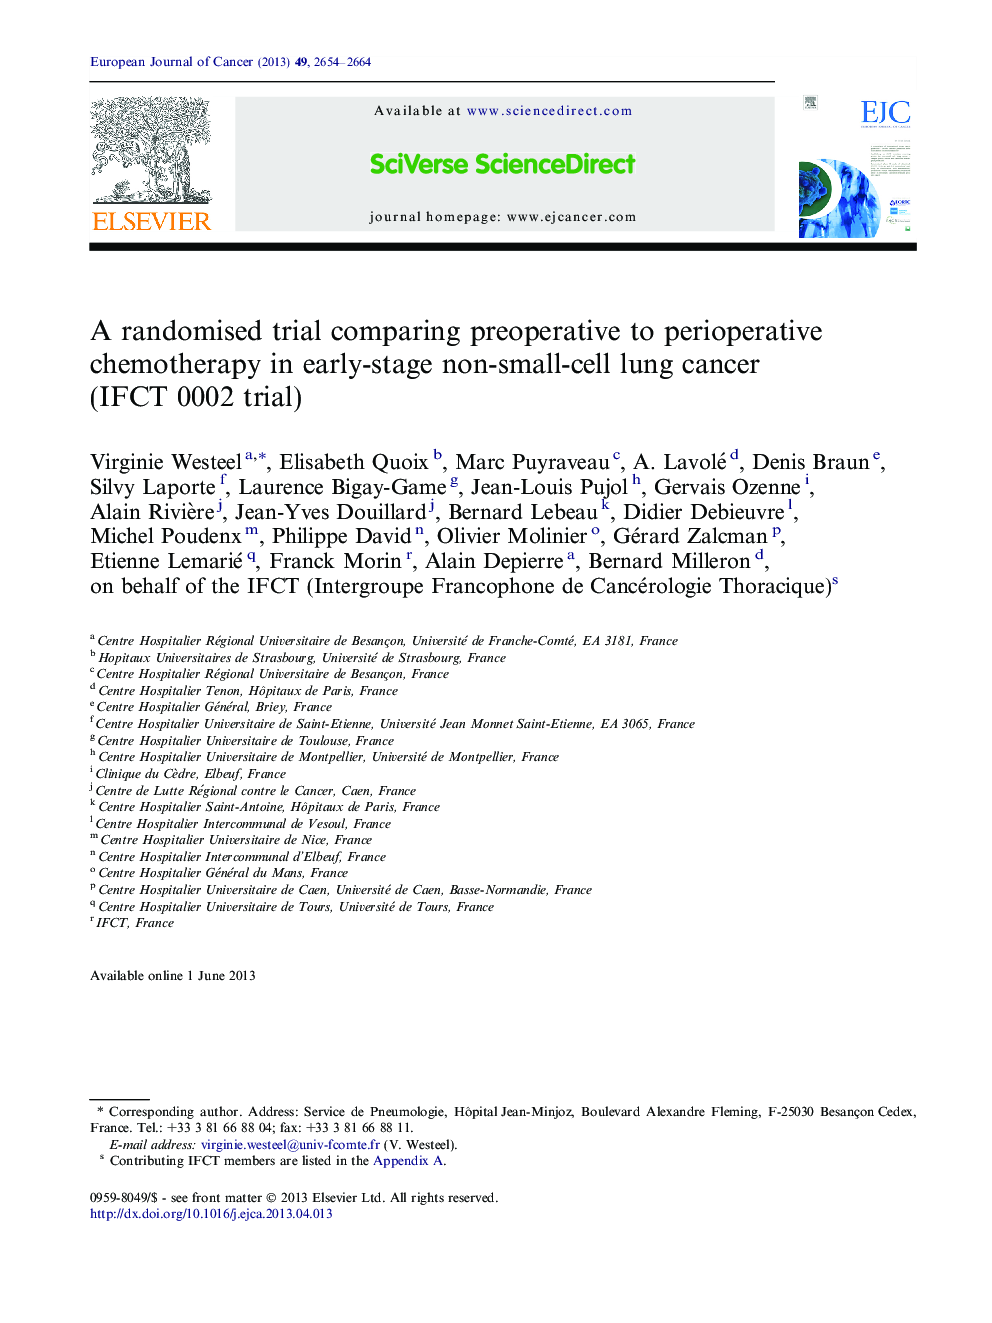 A randomised trial comparing preoperative to perioperative chemotherapy in early-stage non-small-cell lung cancer (IFCT 0002 trial)